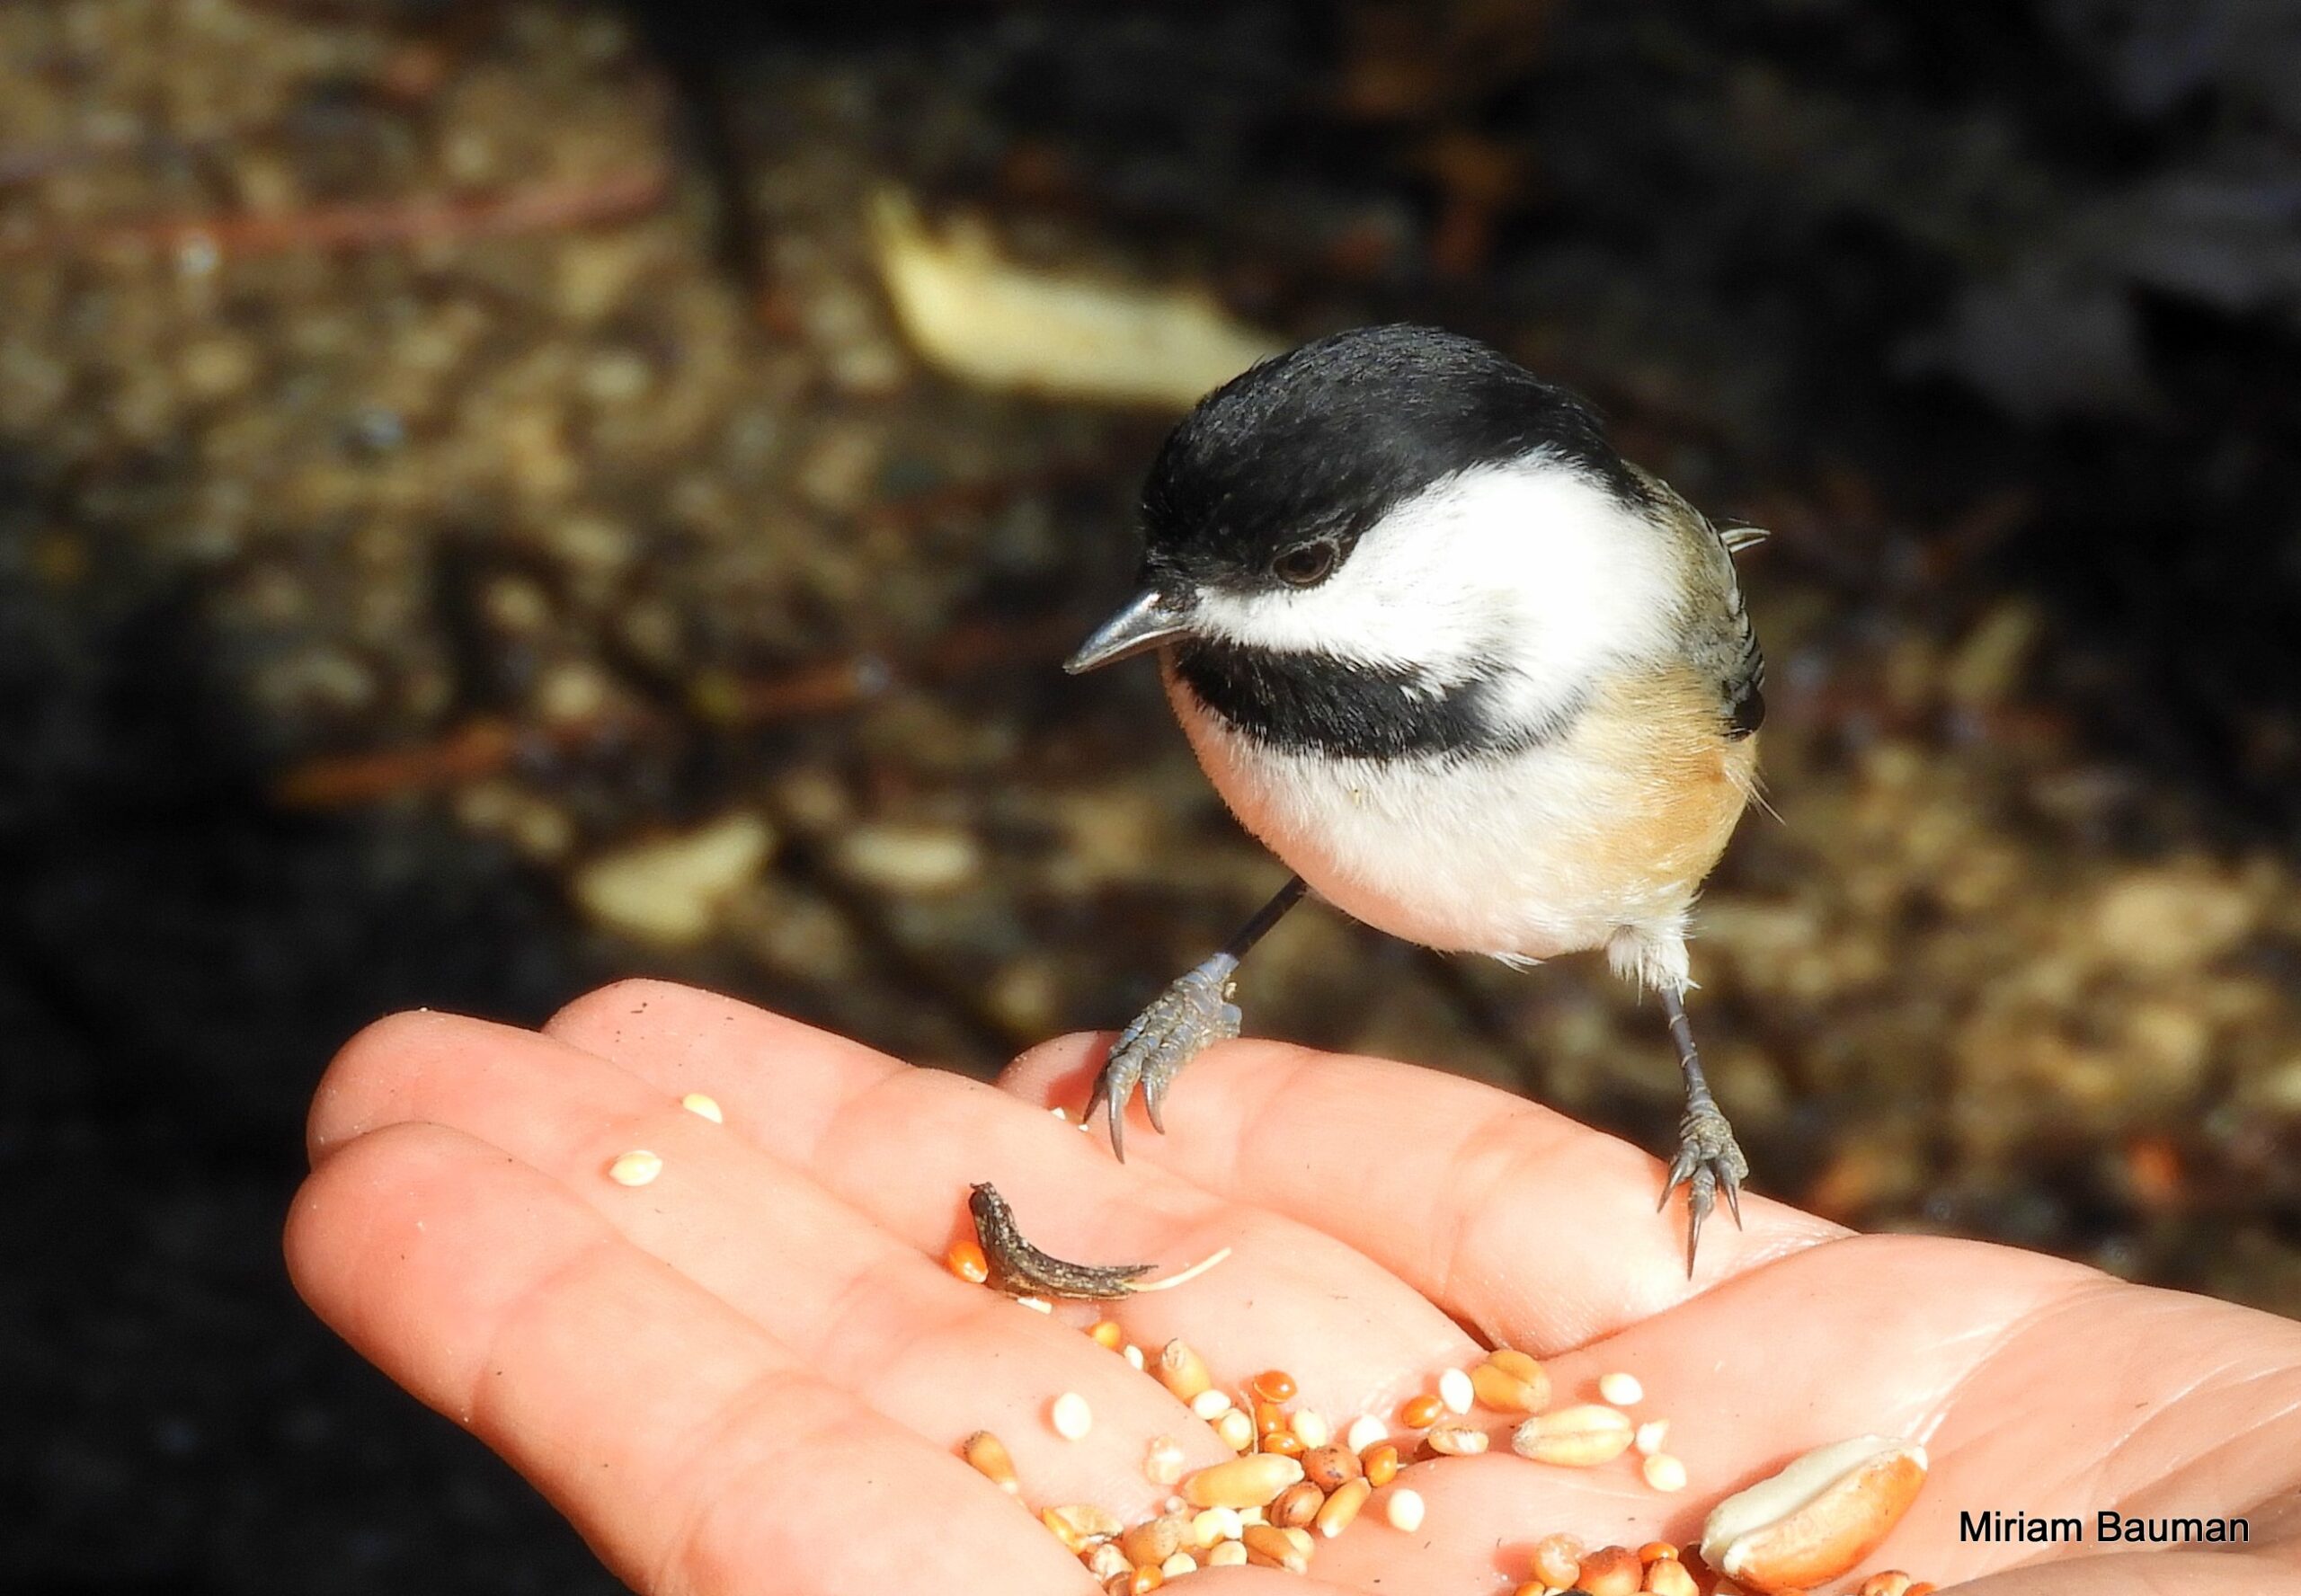 Chickadee eating from a person's hand